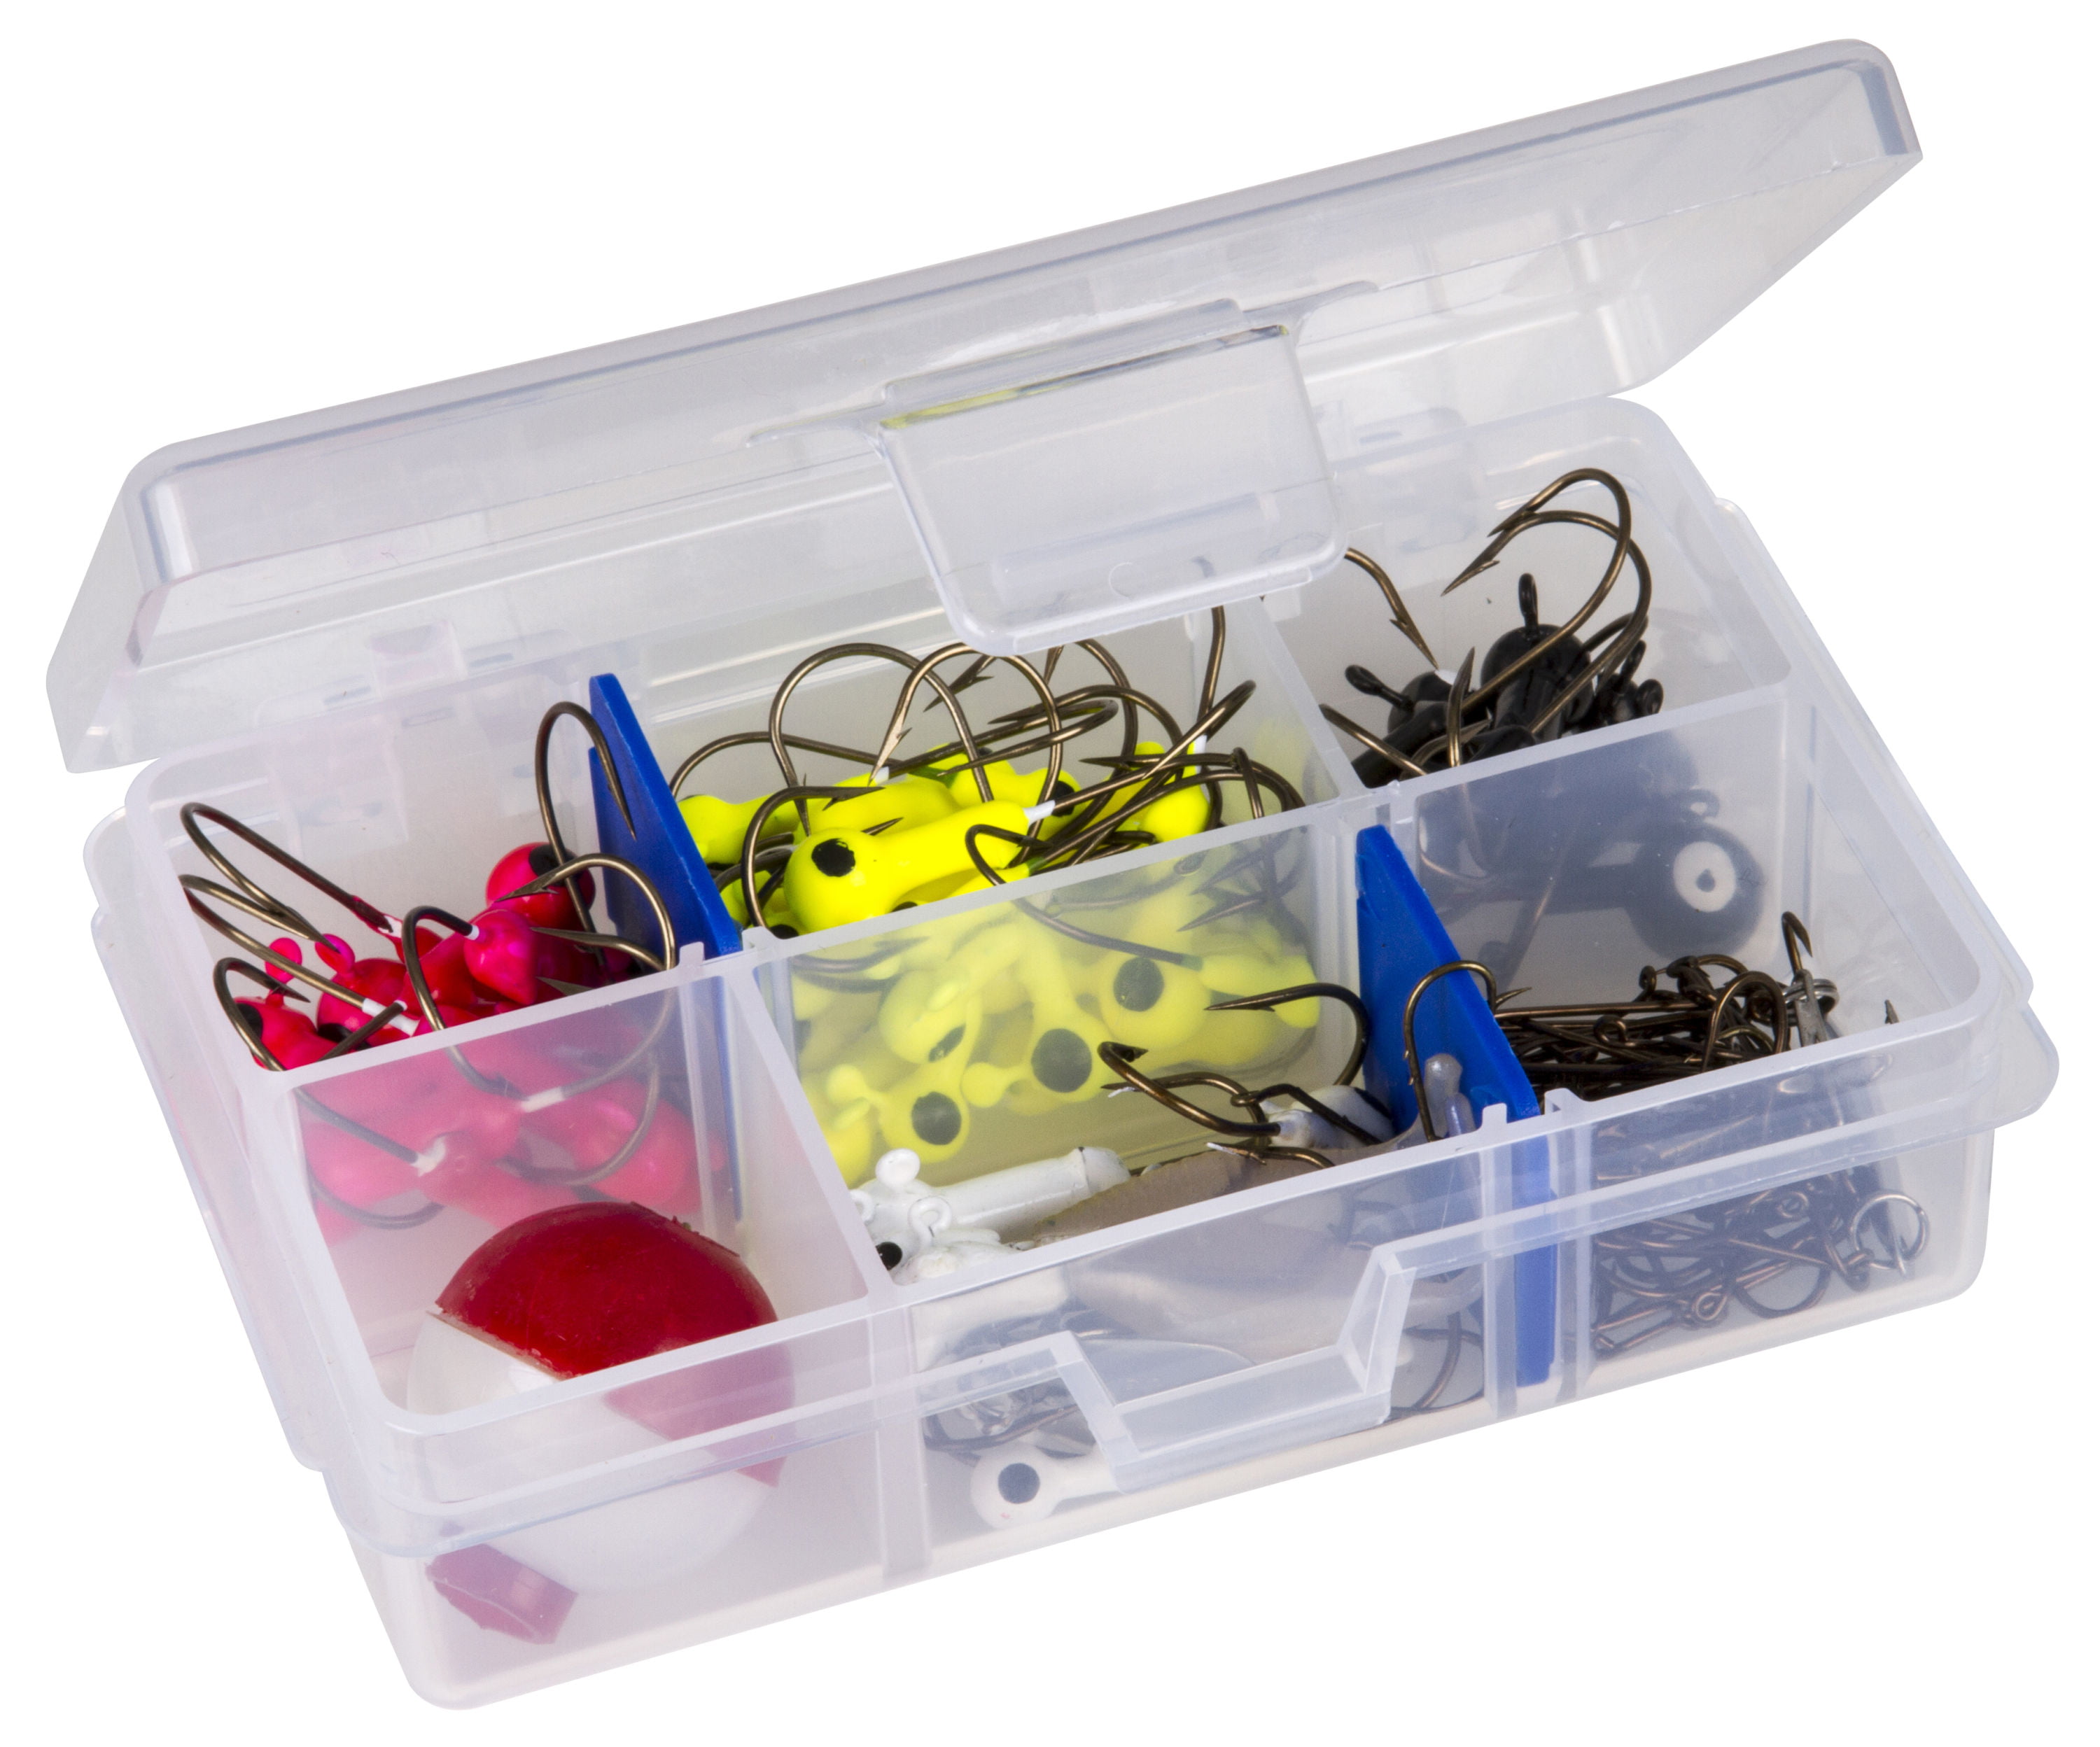 Wdairen Bait Tackle Box Fishing Tackle Boxes Small Clear Plastic Fishing Box